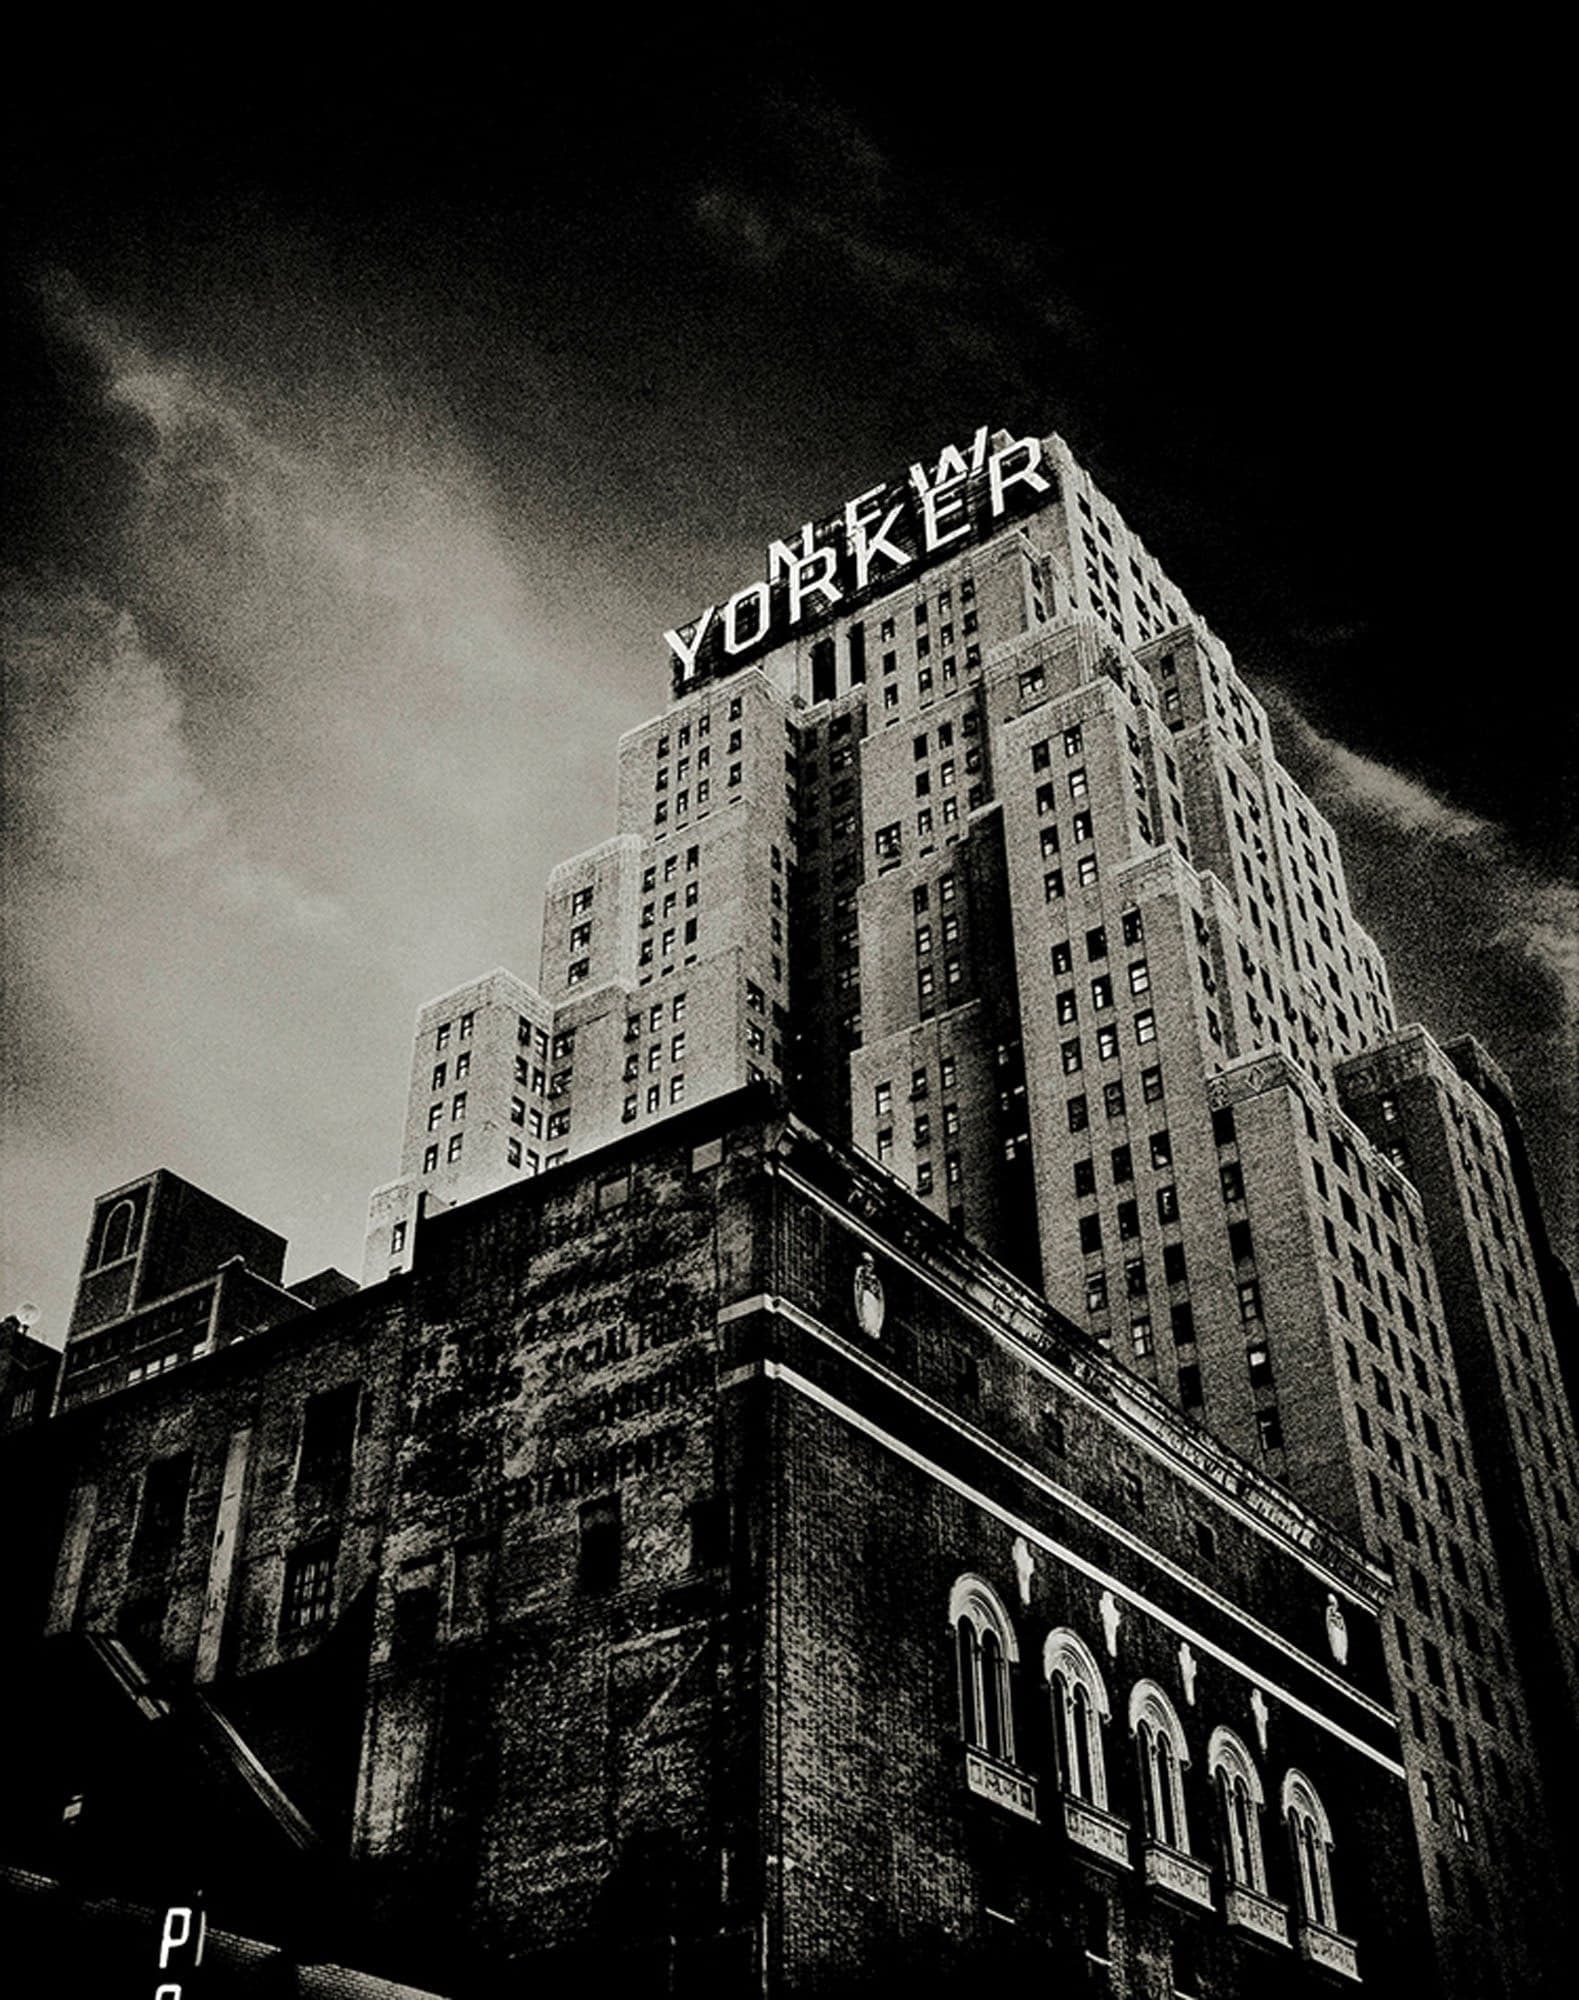 The New Yorker Hotel, New York.